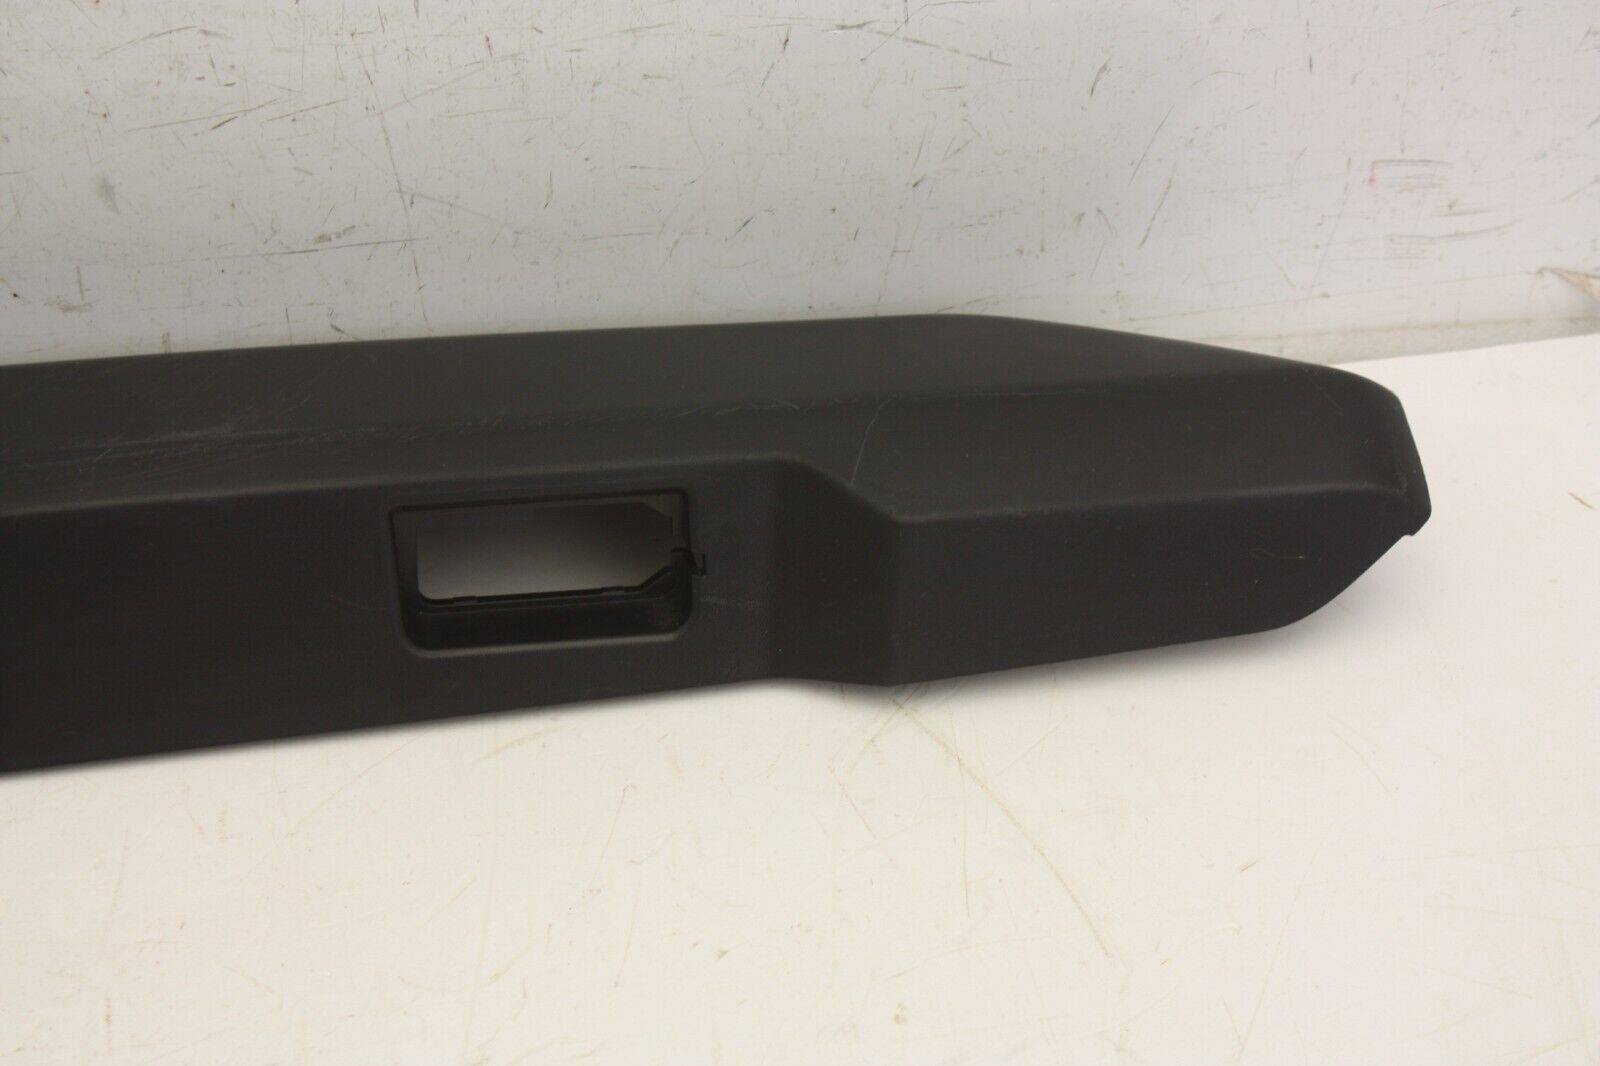 Ford-Transit-Custom-Tailgate-Lid-Cover-Recording-Bar-2018-ON-BK21-13555-AFW-176302846649-10